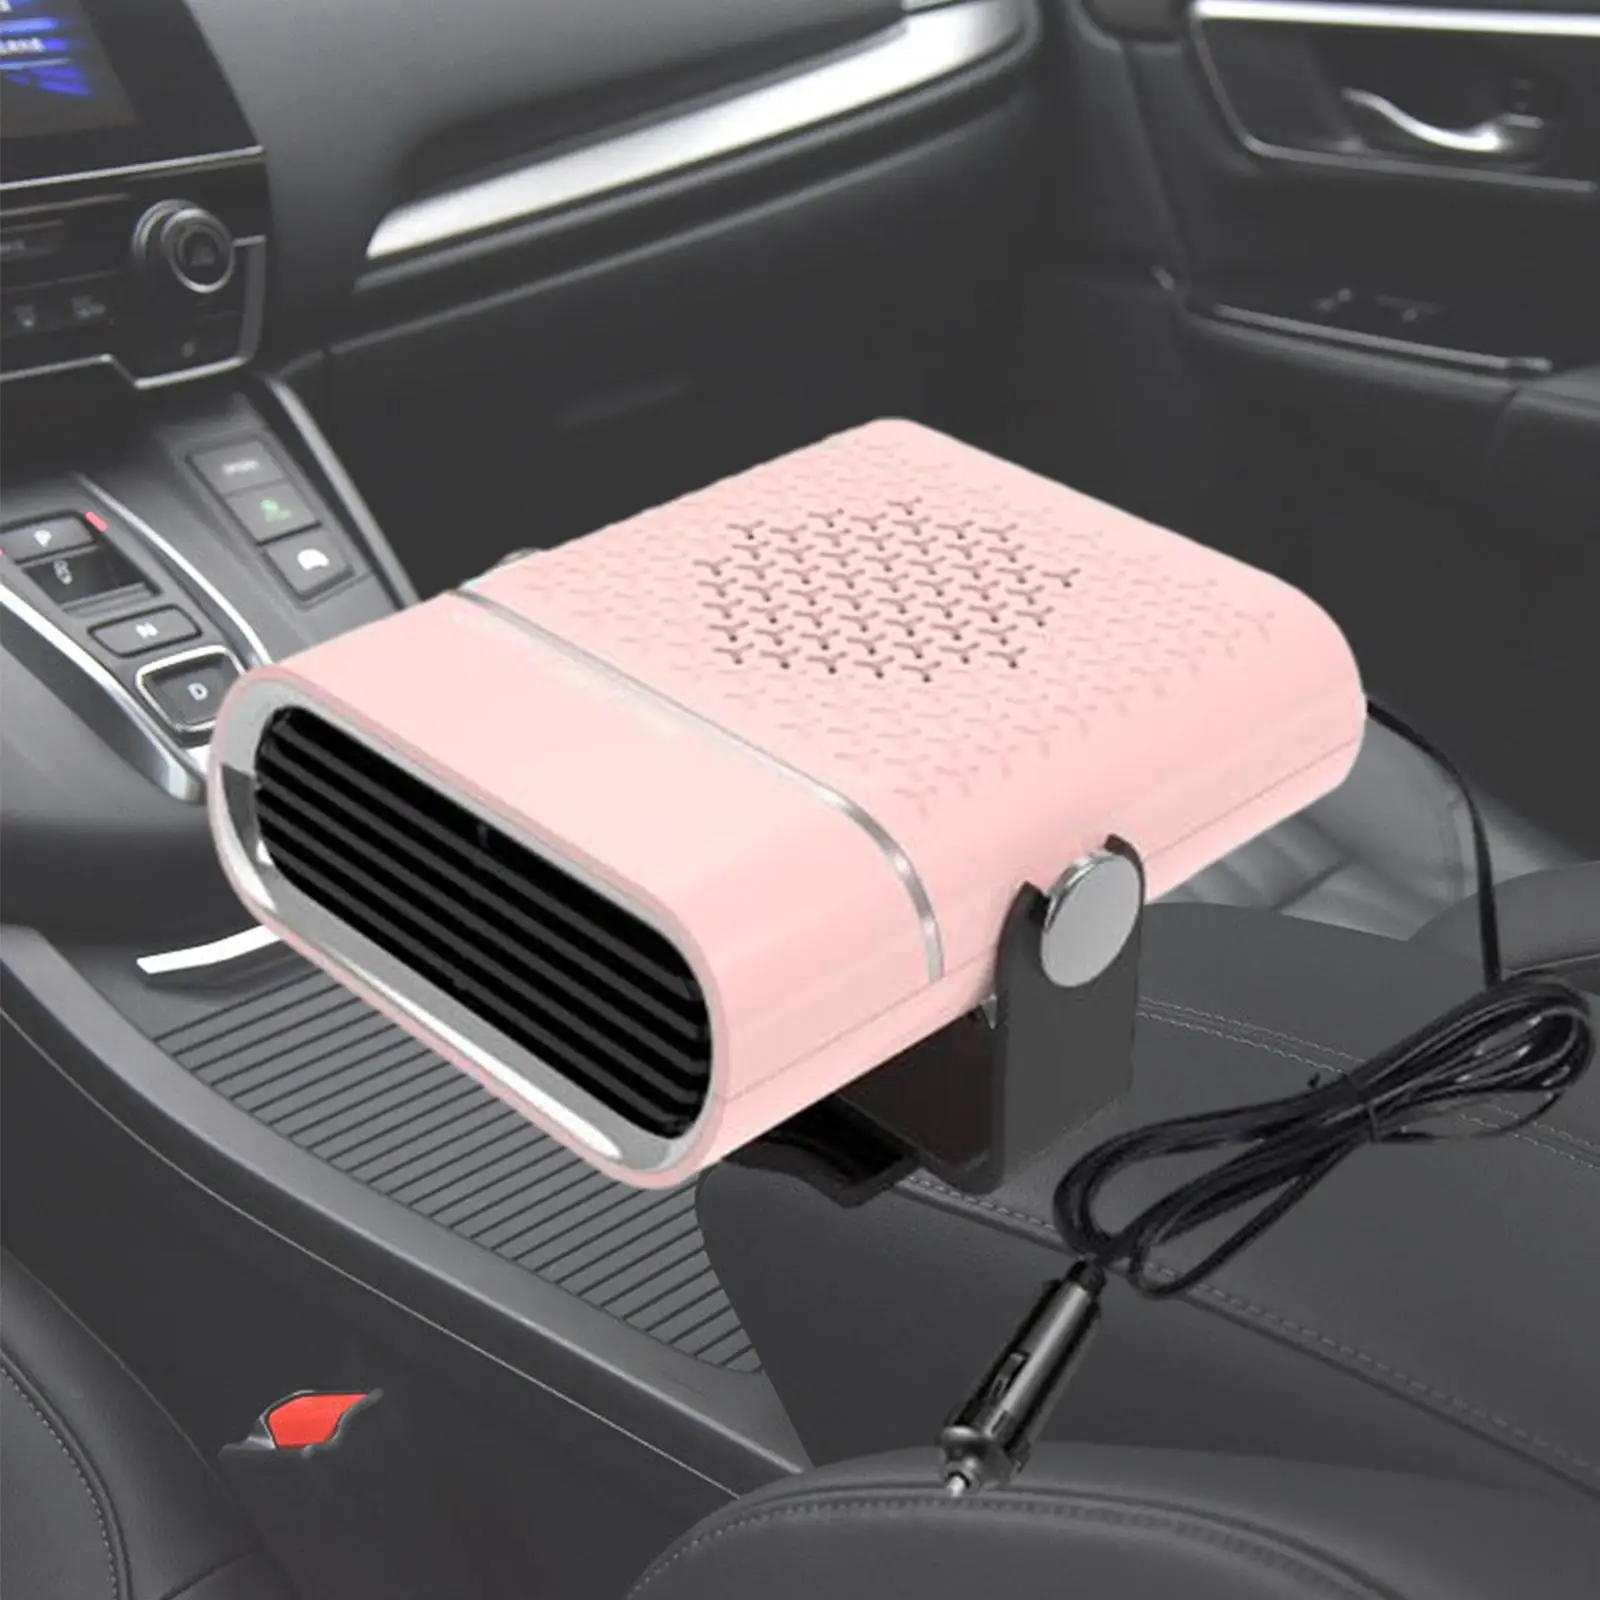 Car Heater 24V 2 in 1 Plug into Lighter 260W Auto Vehicle Heater